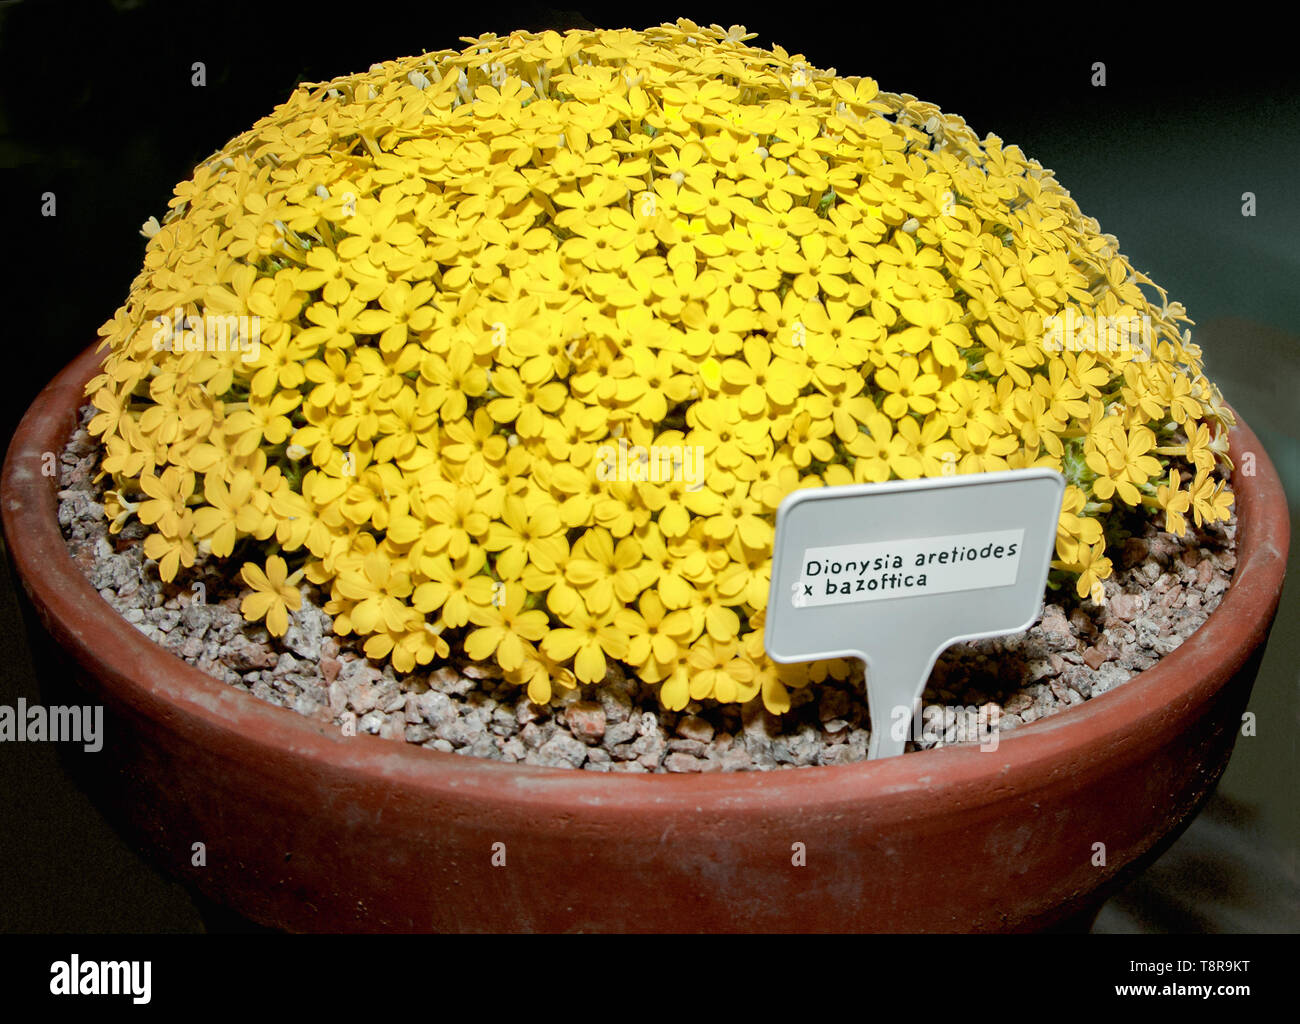 Dionysia aretiodes x bazoftica a hardy alpine plant suitable for rockeries grown as a container plant for show. Stock Photo